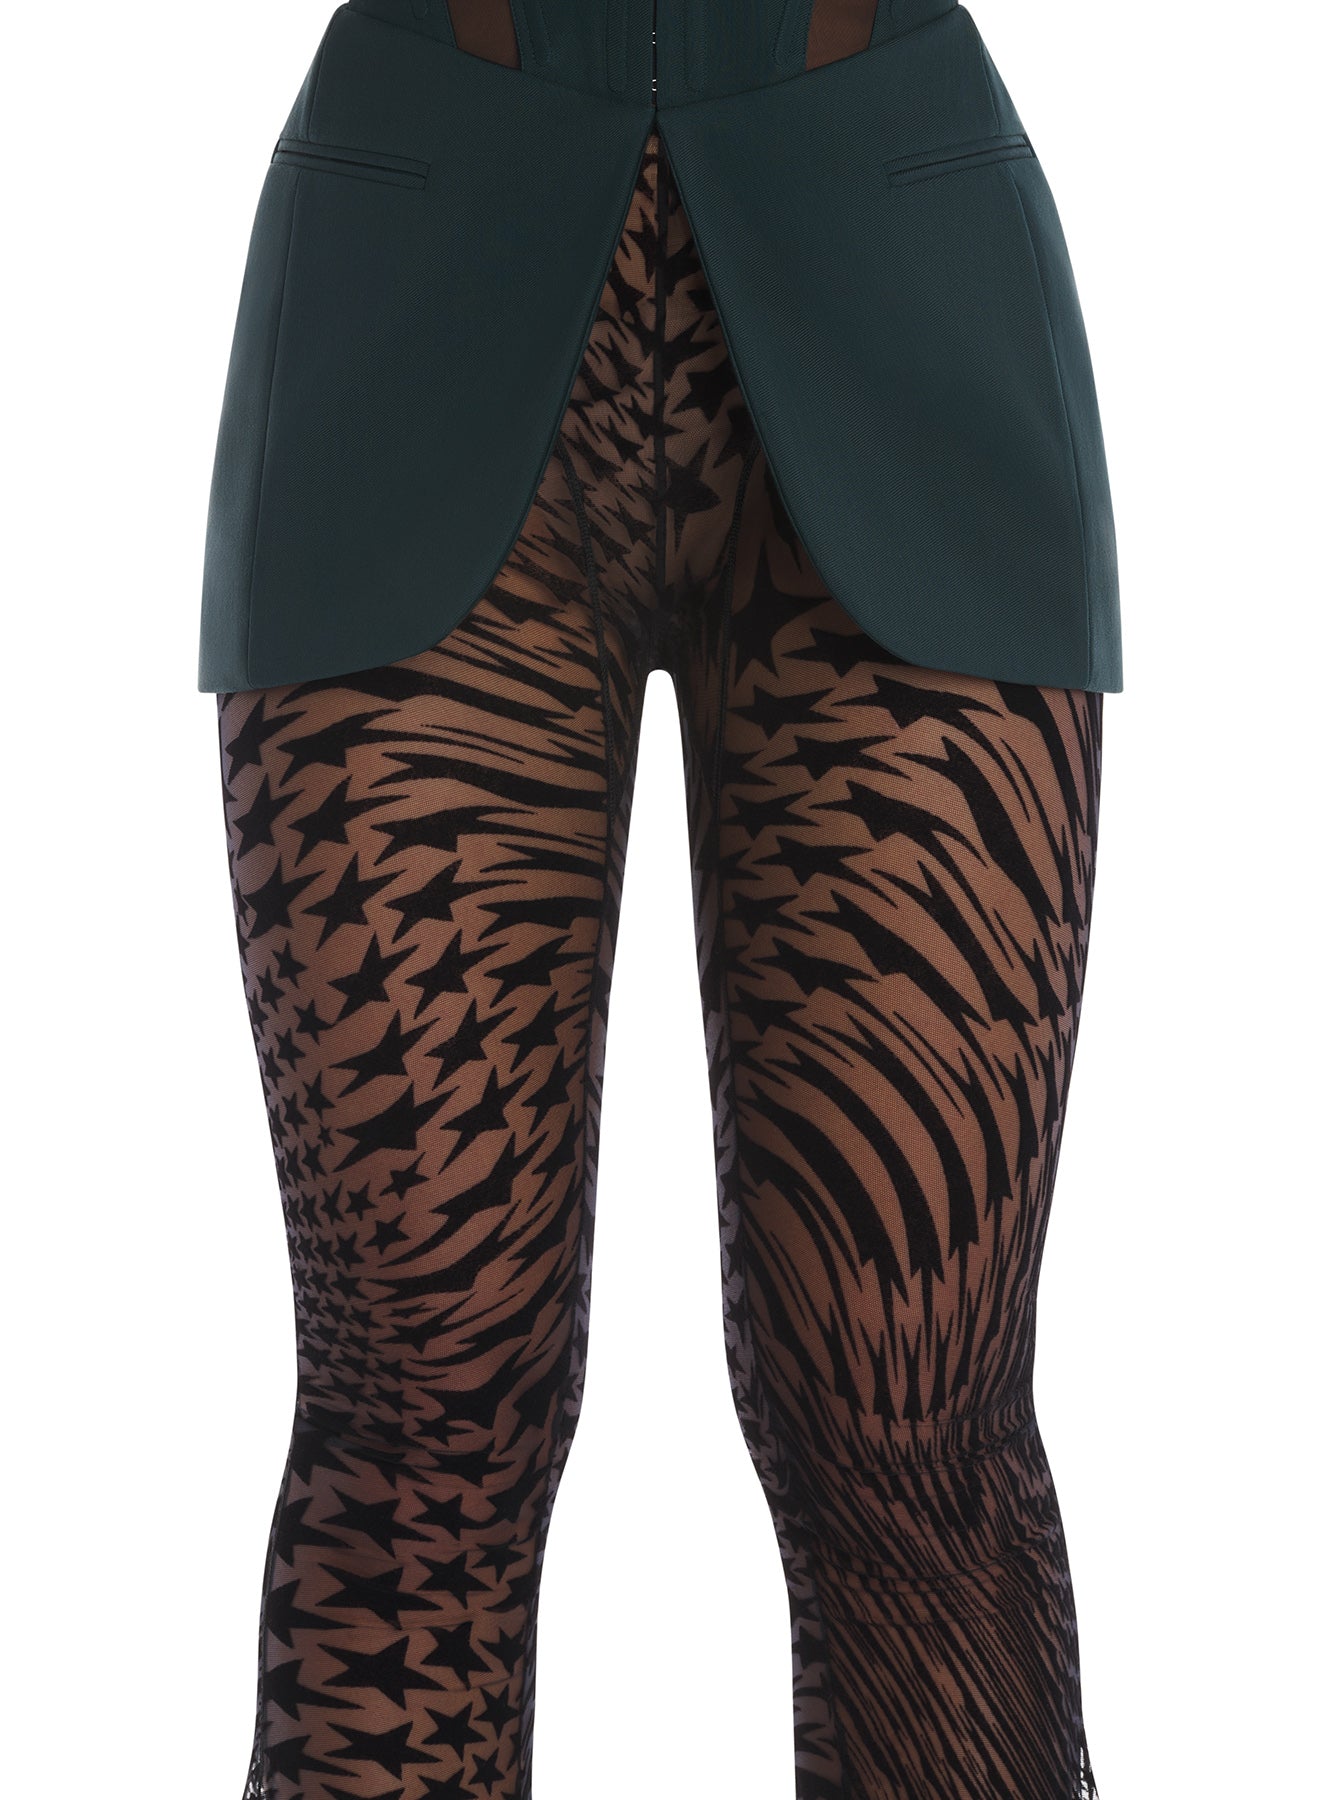 Cathedral Windows leggings, velvet trousers with flocking mesh